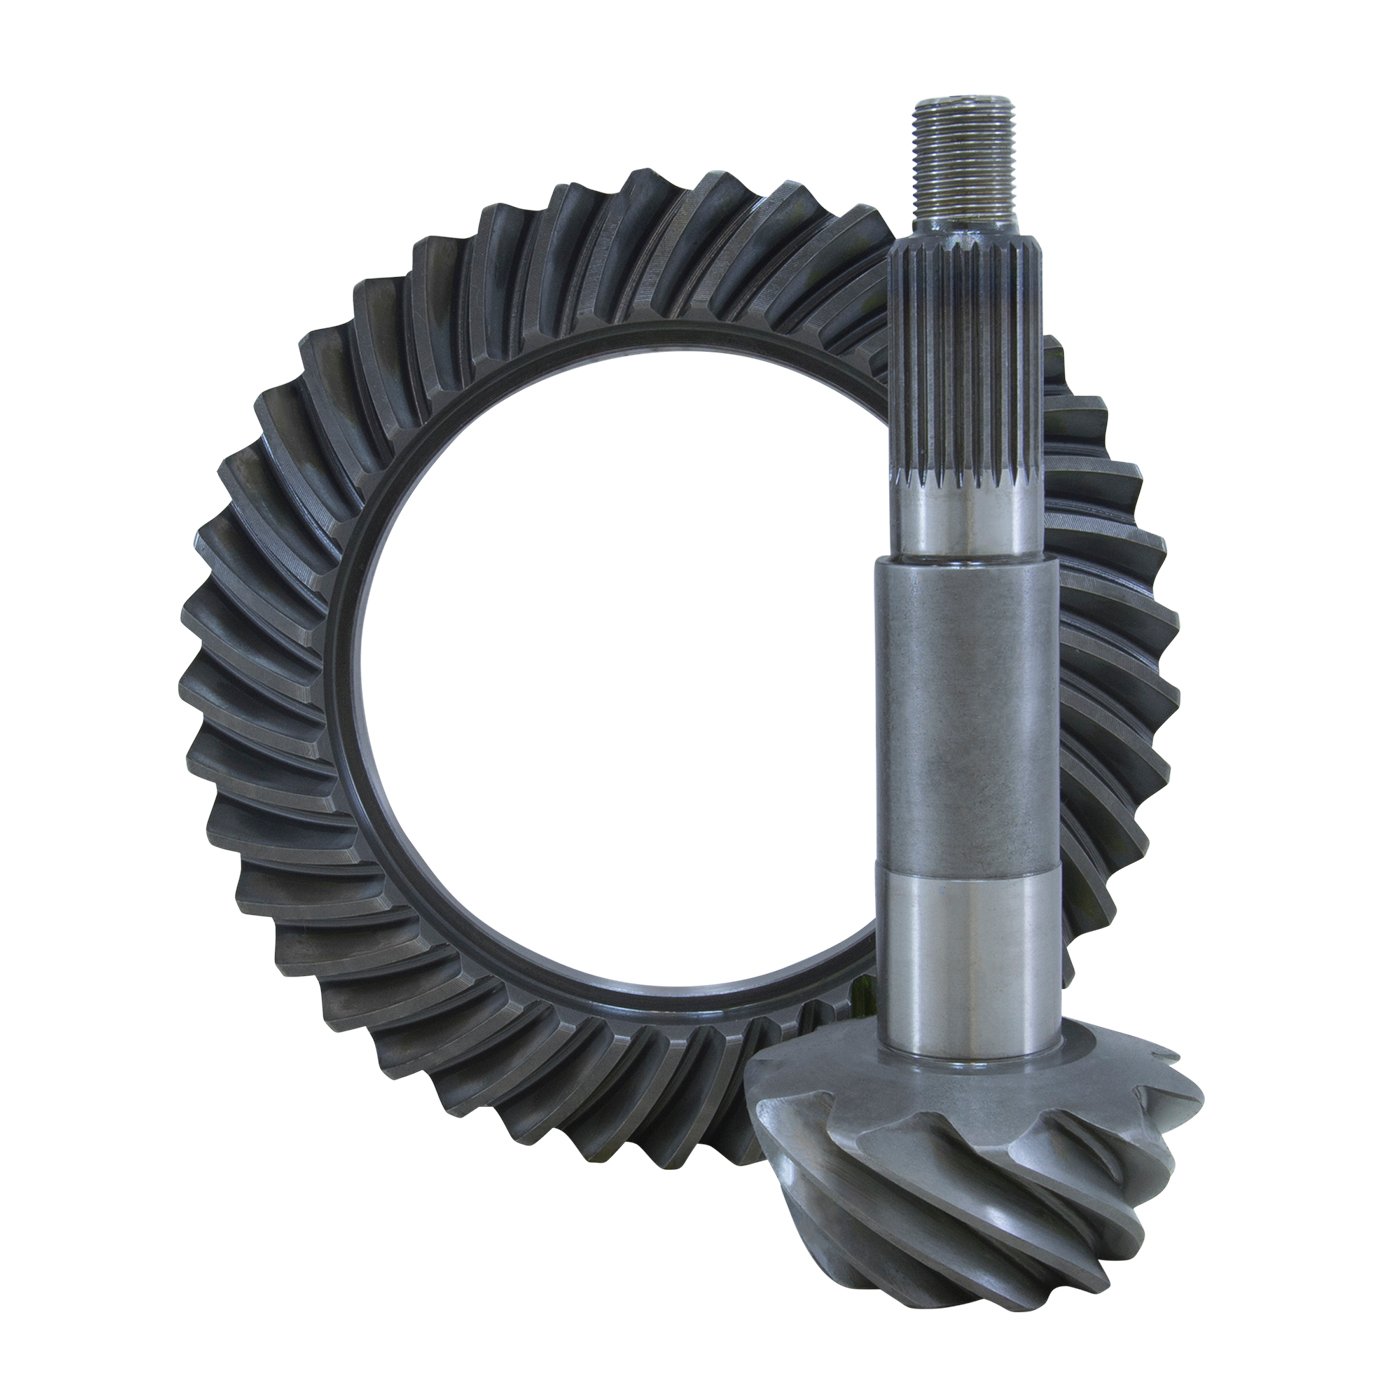 USA Standard ZG D44-488T Replacement Ring & Pinion